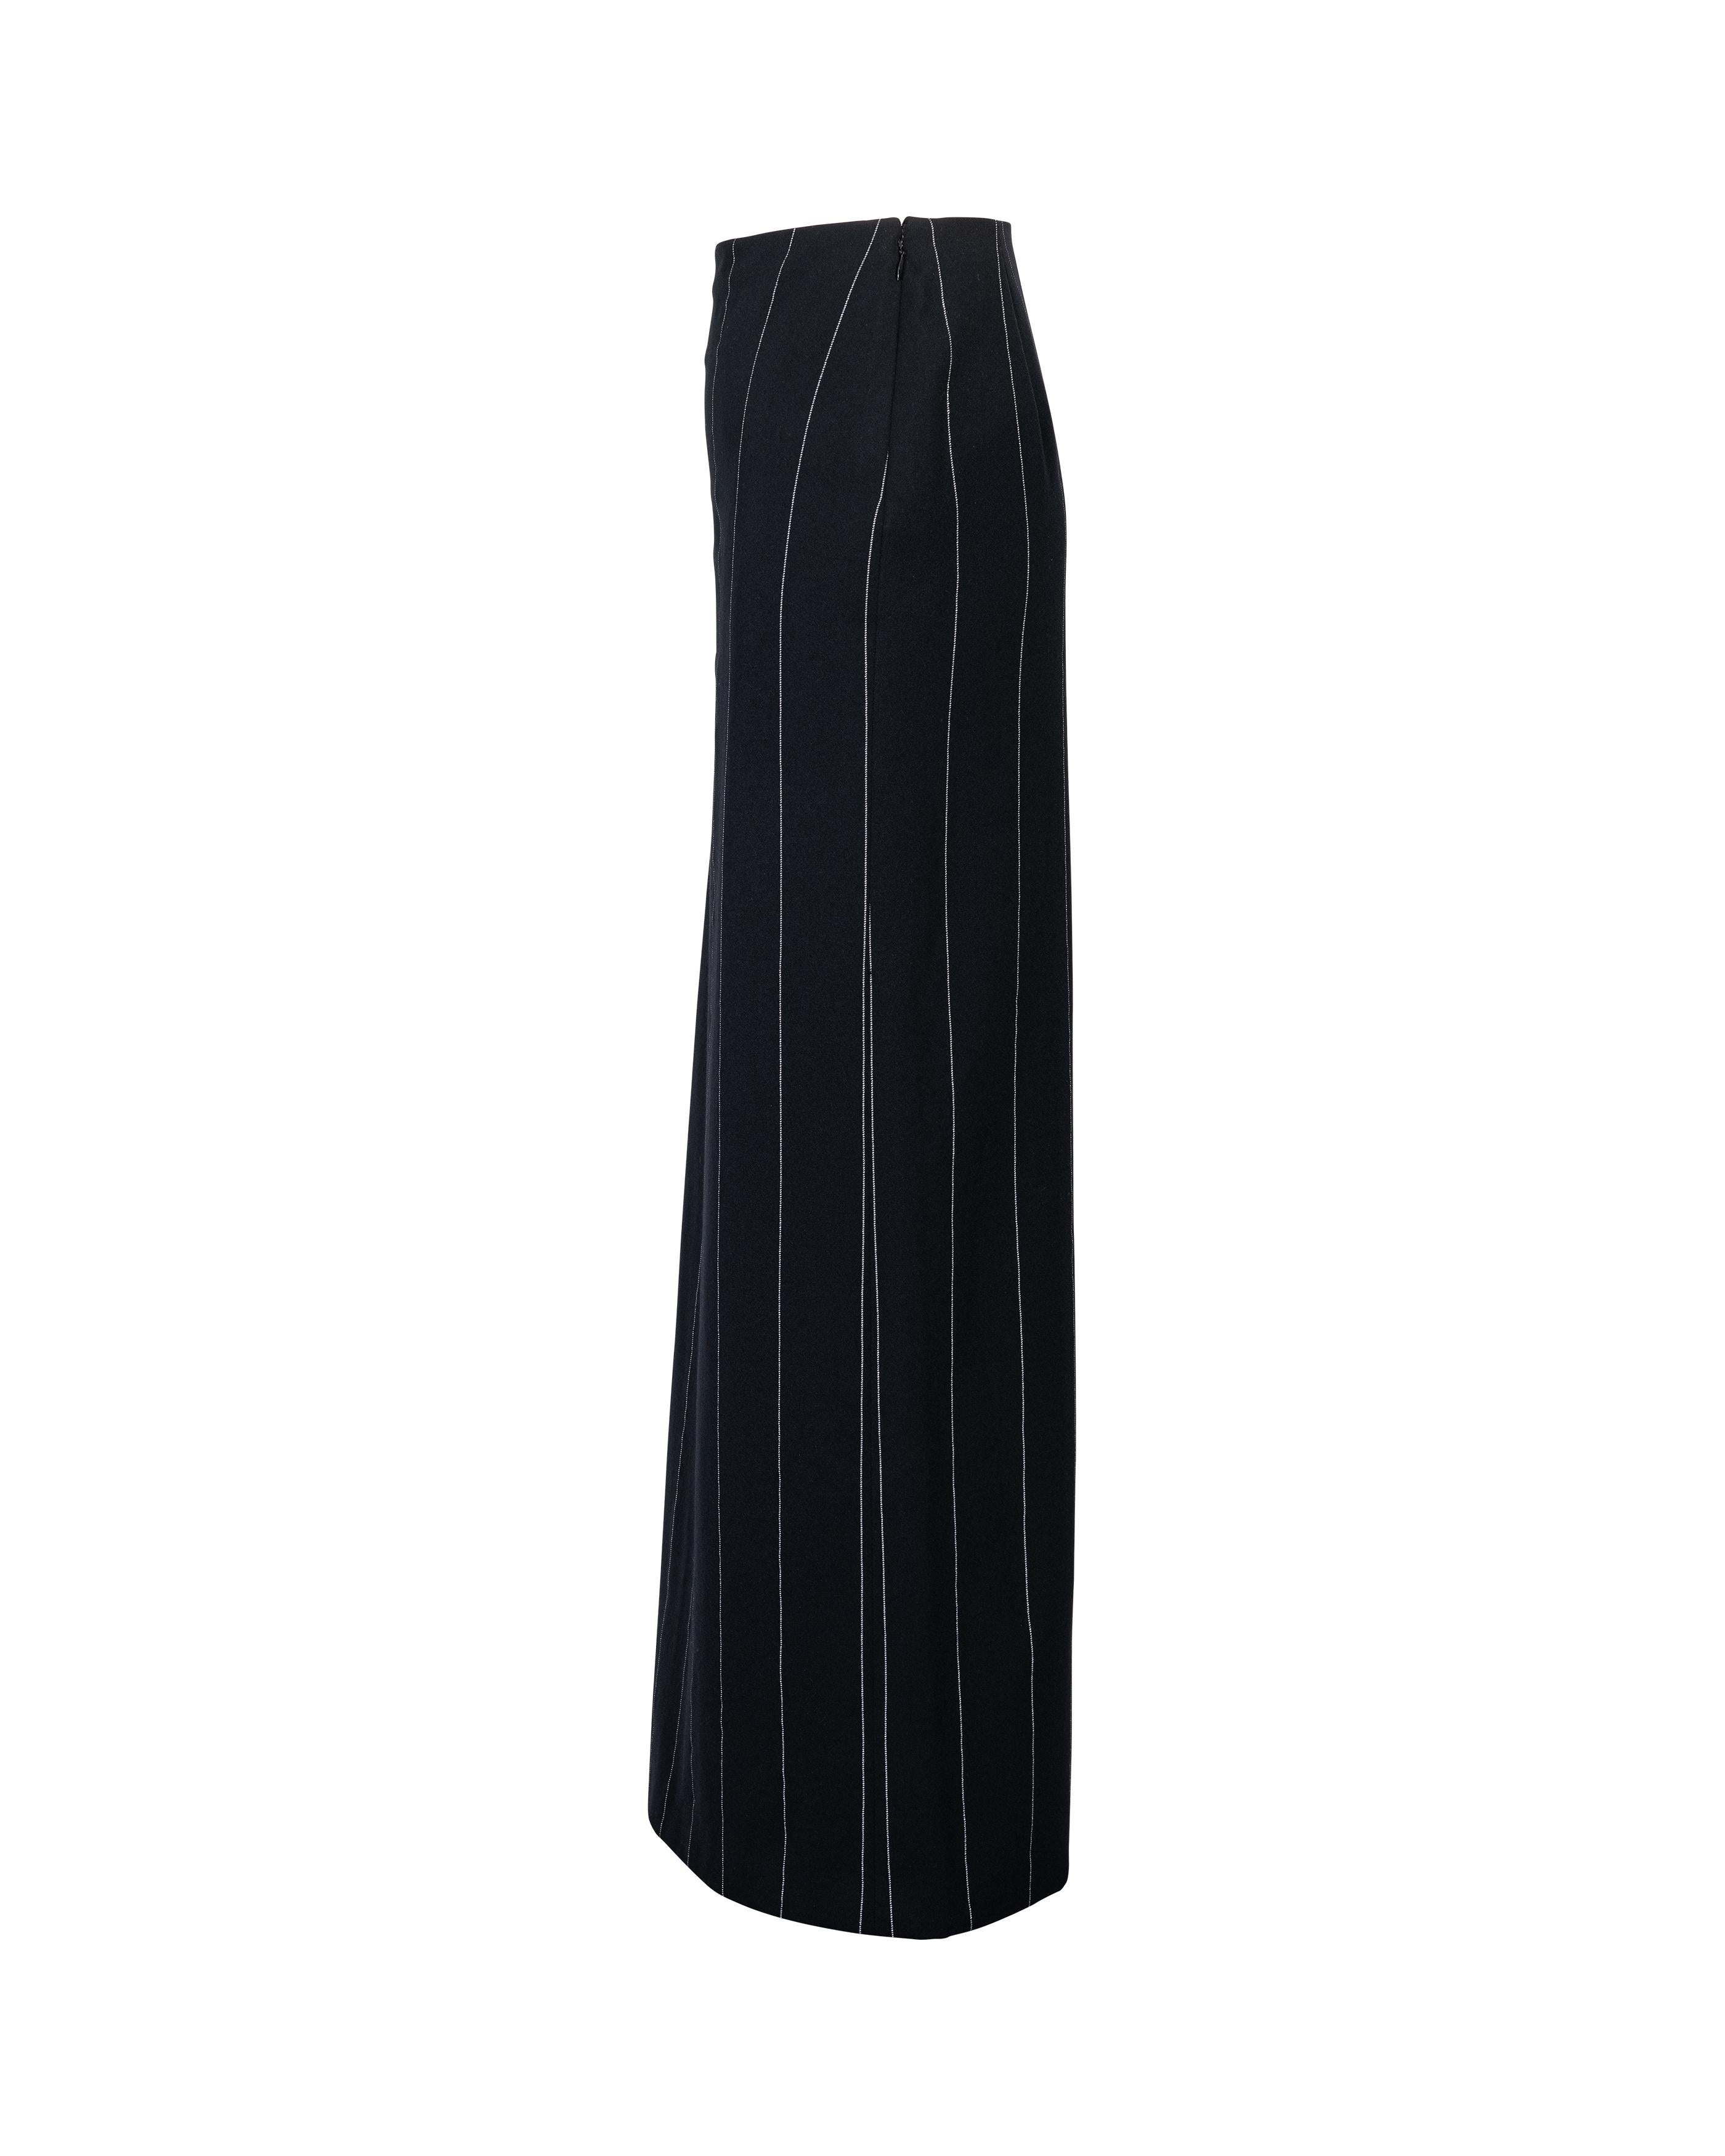 A/W 1998 Gianni Versace Deep Navy Pinstripe Skirt In Excellent Condition In North Hollywood, CA